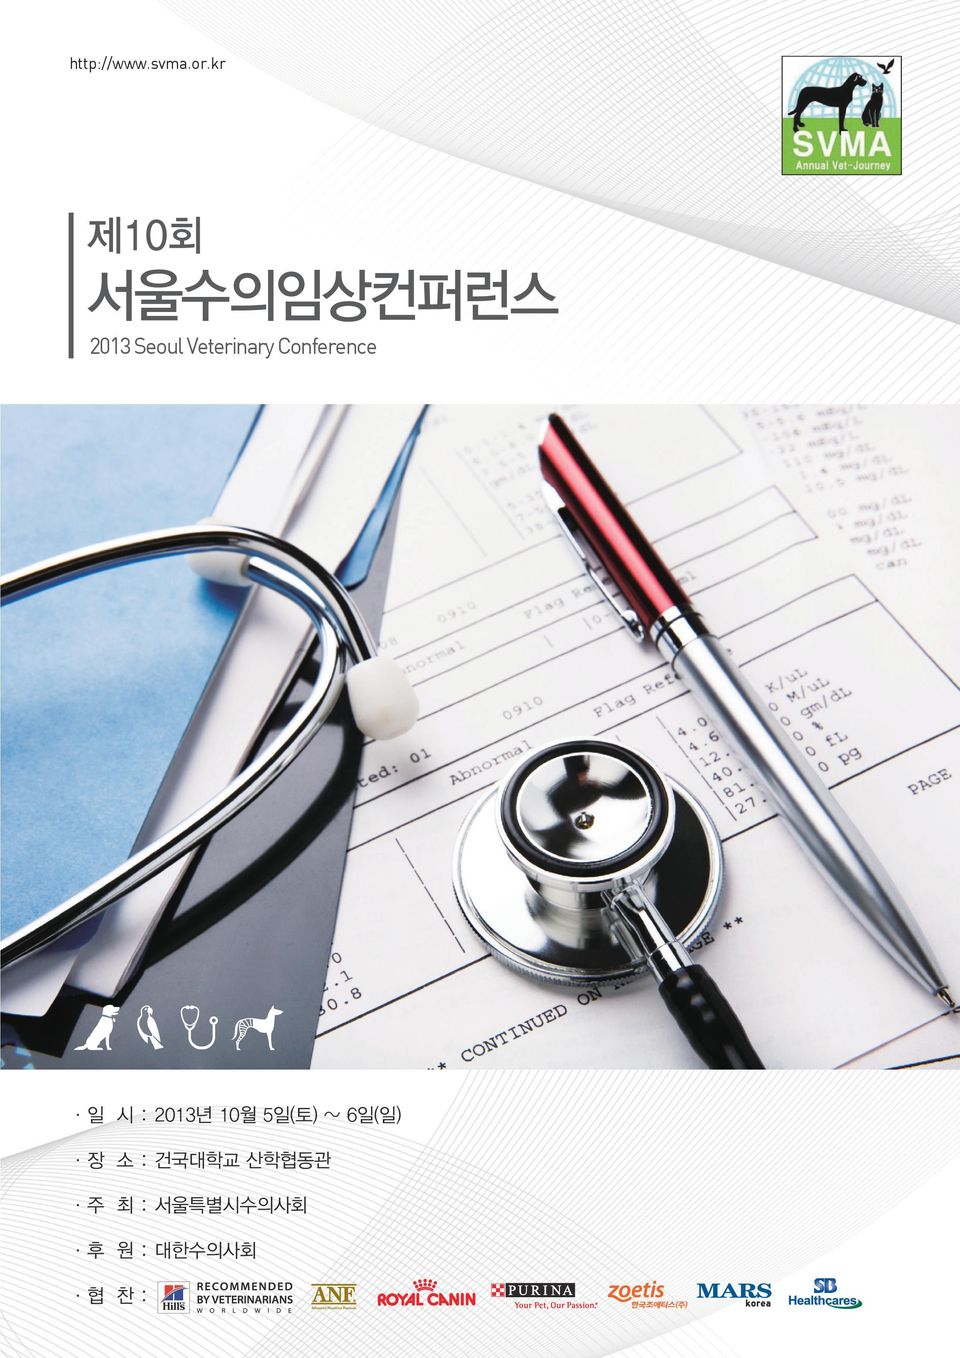 Veterinary Conference 일 시 : 2013년 10월